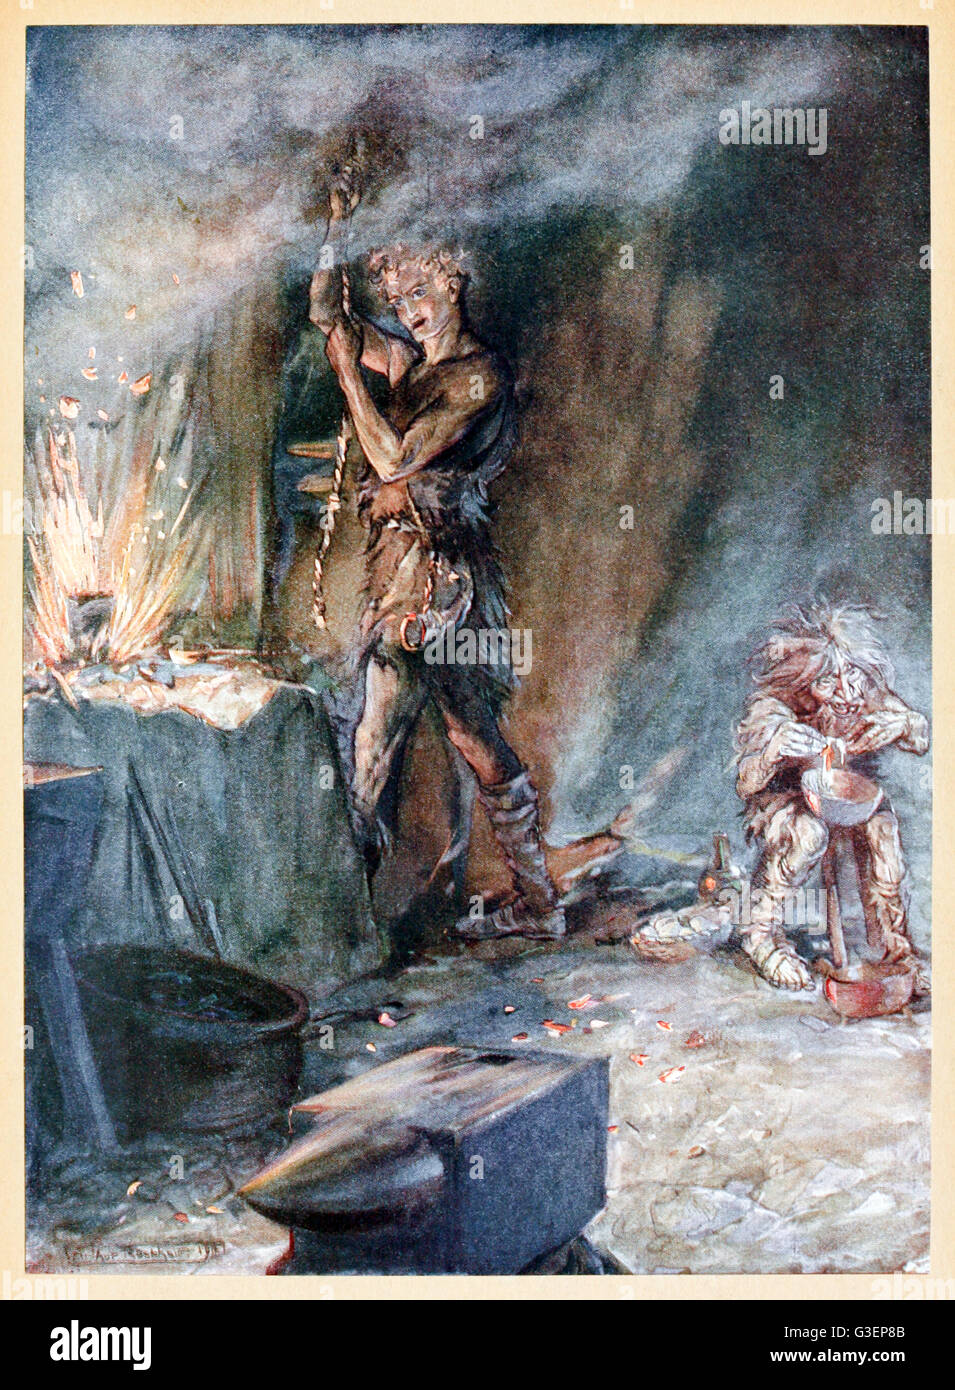 “The forging of Nothung” from 'Siegfried & The Twilight of the Gods' illustrated by Arthur Rackham (1867-1939). See description for more information. Stock Photo